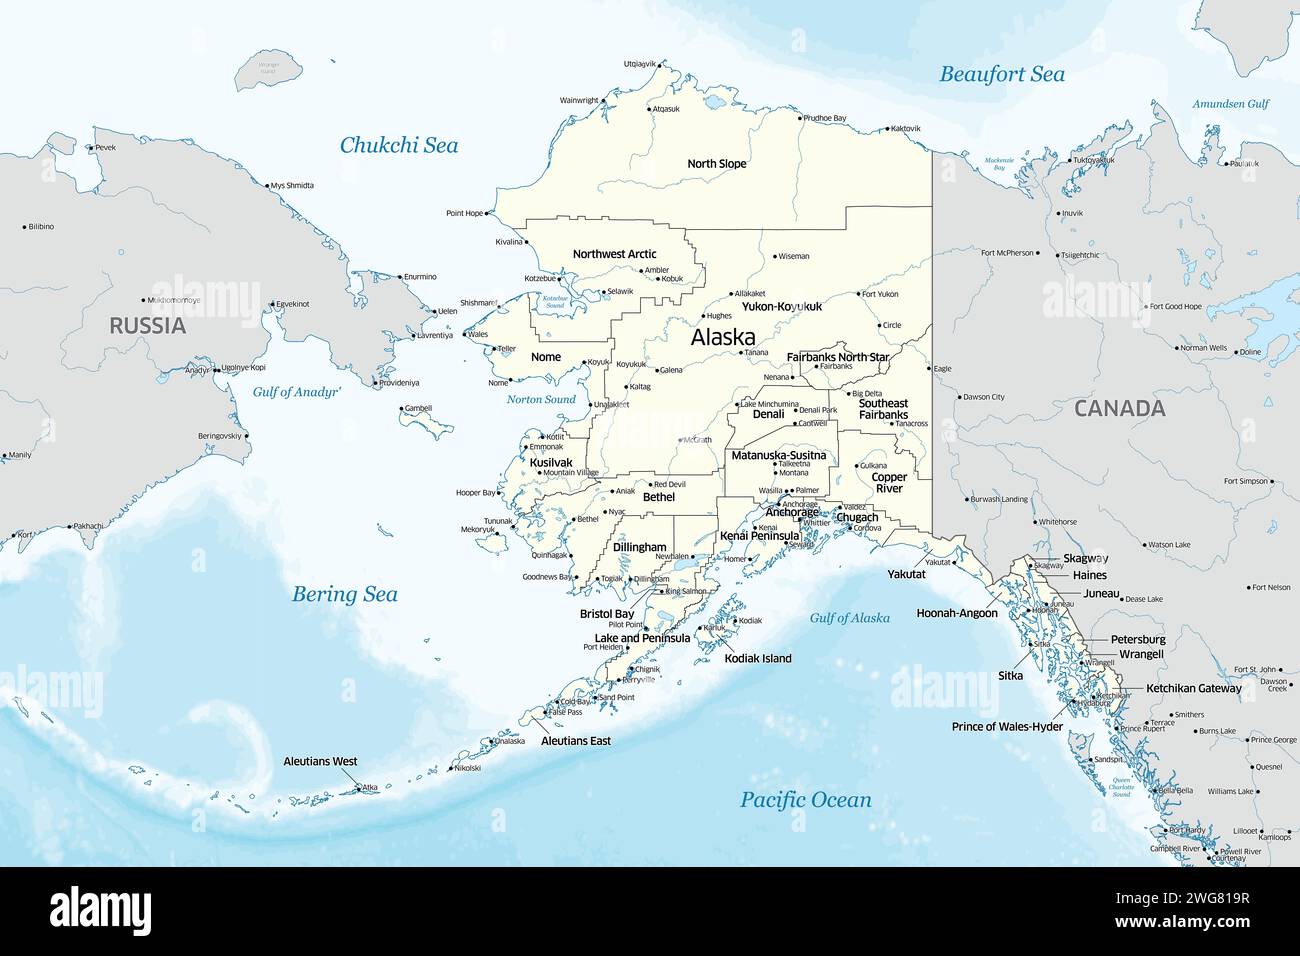 Political map showing the counties that make up the state of Alaska in the United States Stock Photo